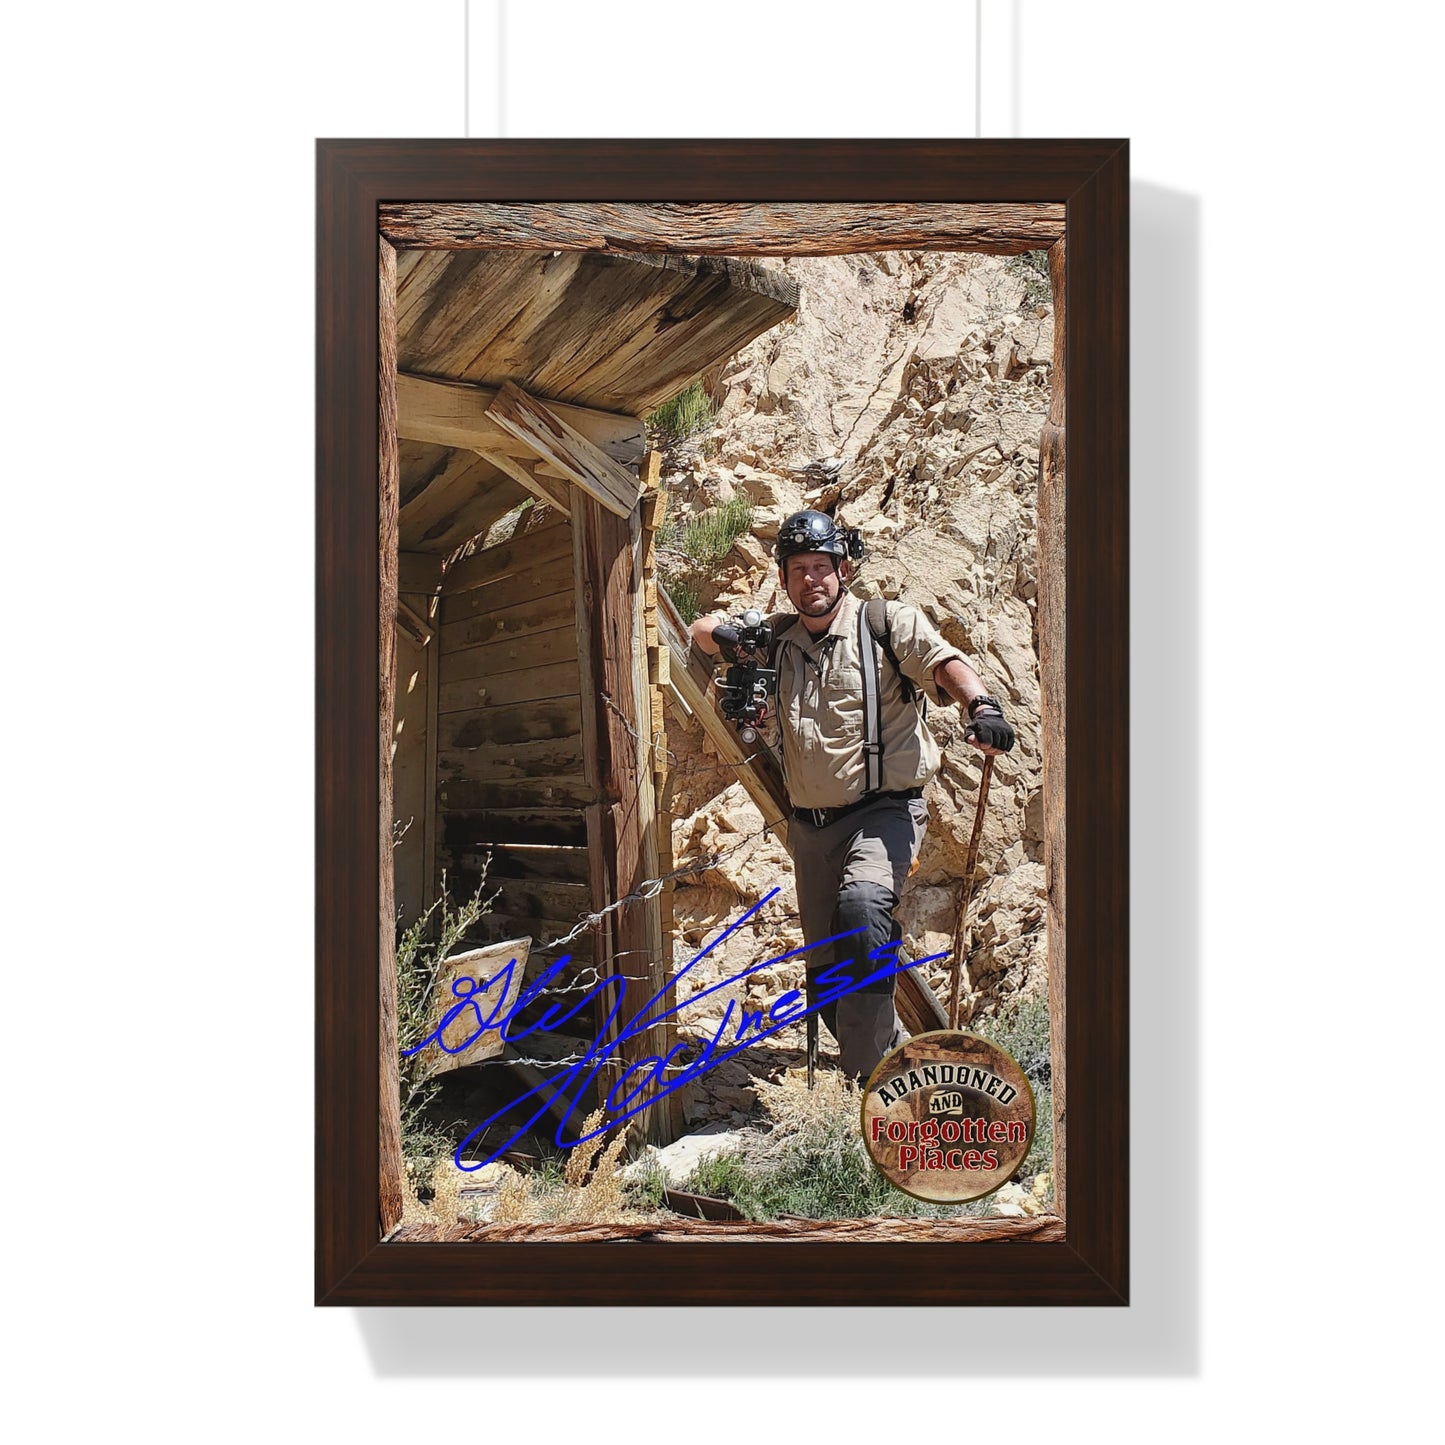 Gly Coolness Signature Collection, The Soaring Eagle Mine, Episode 54 (Framed)